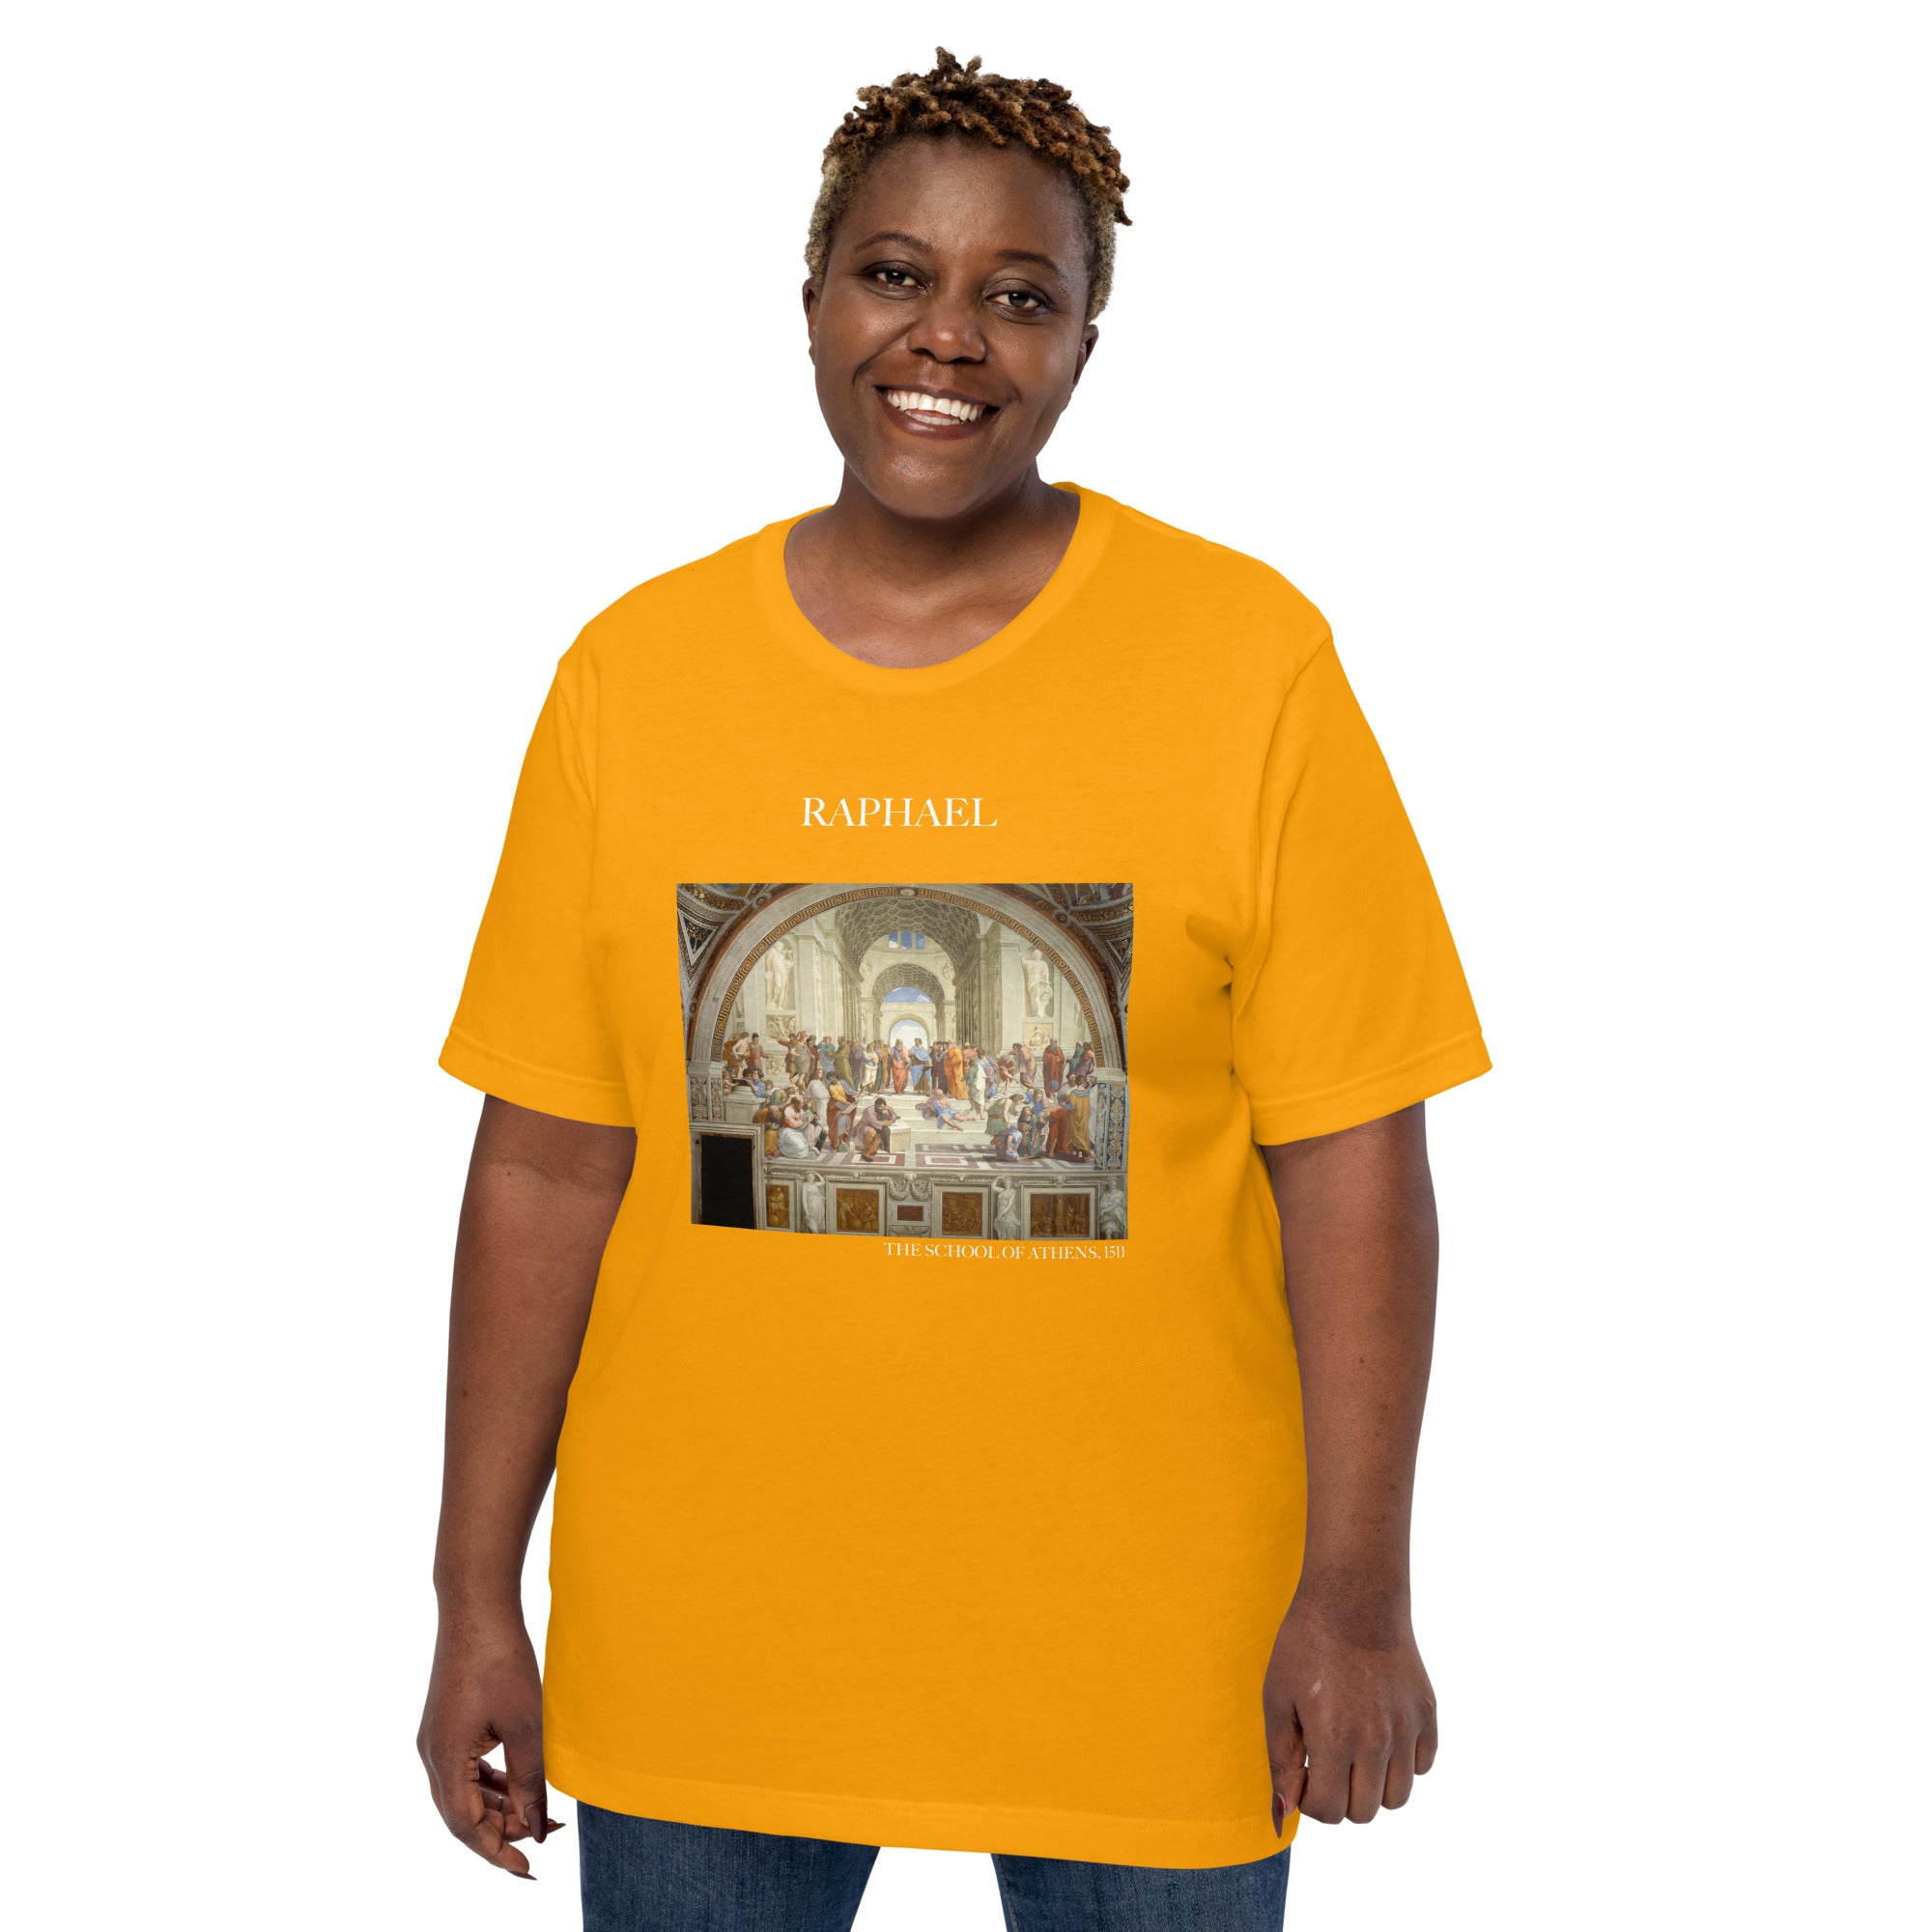 Raphael 'The School of Athens' Famous Painting T-Shirt | Unisex Classic Art Tee